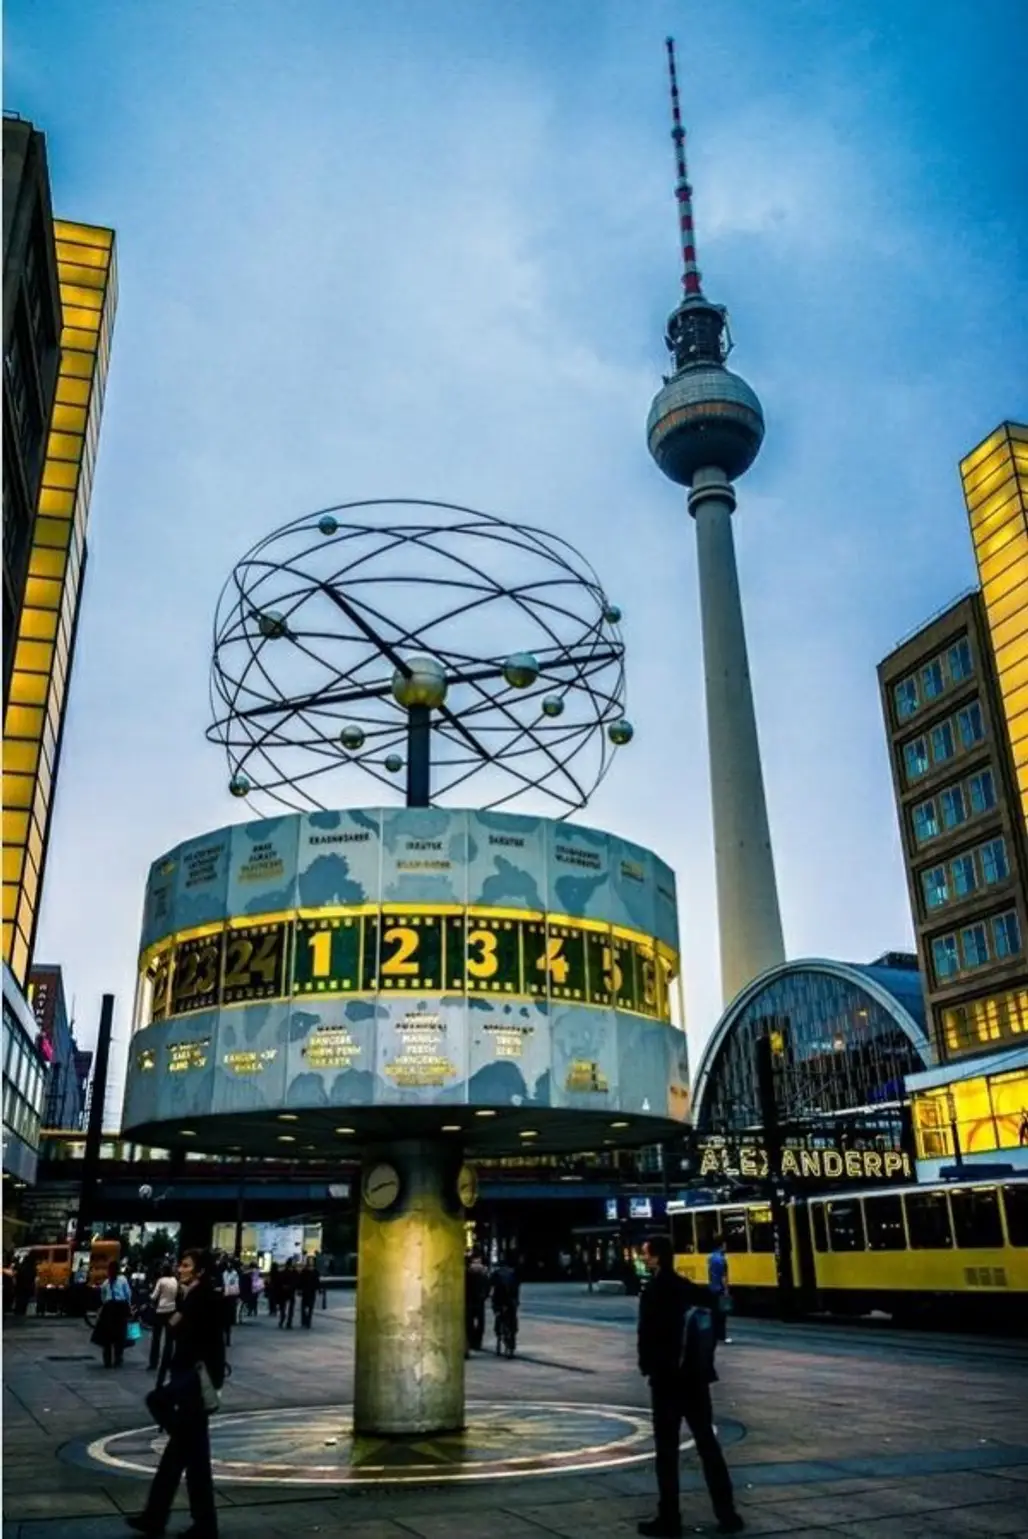 Mingle with the Crowd at Alexanderplatz